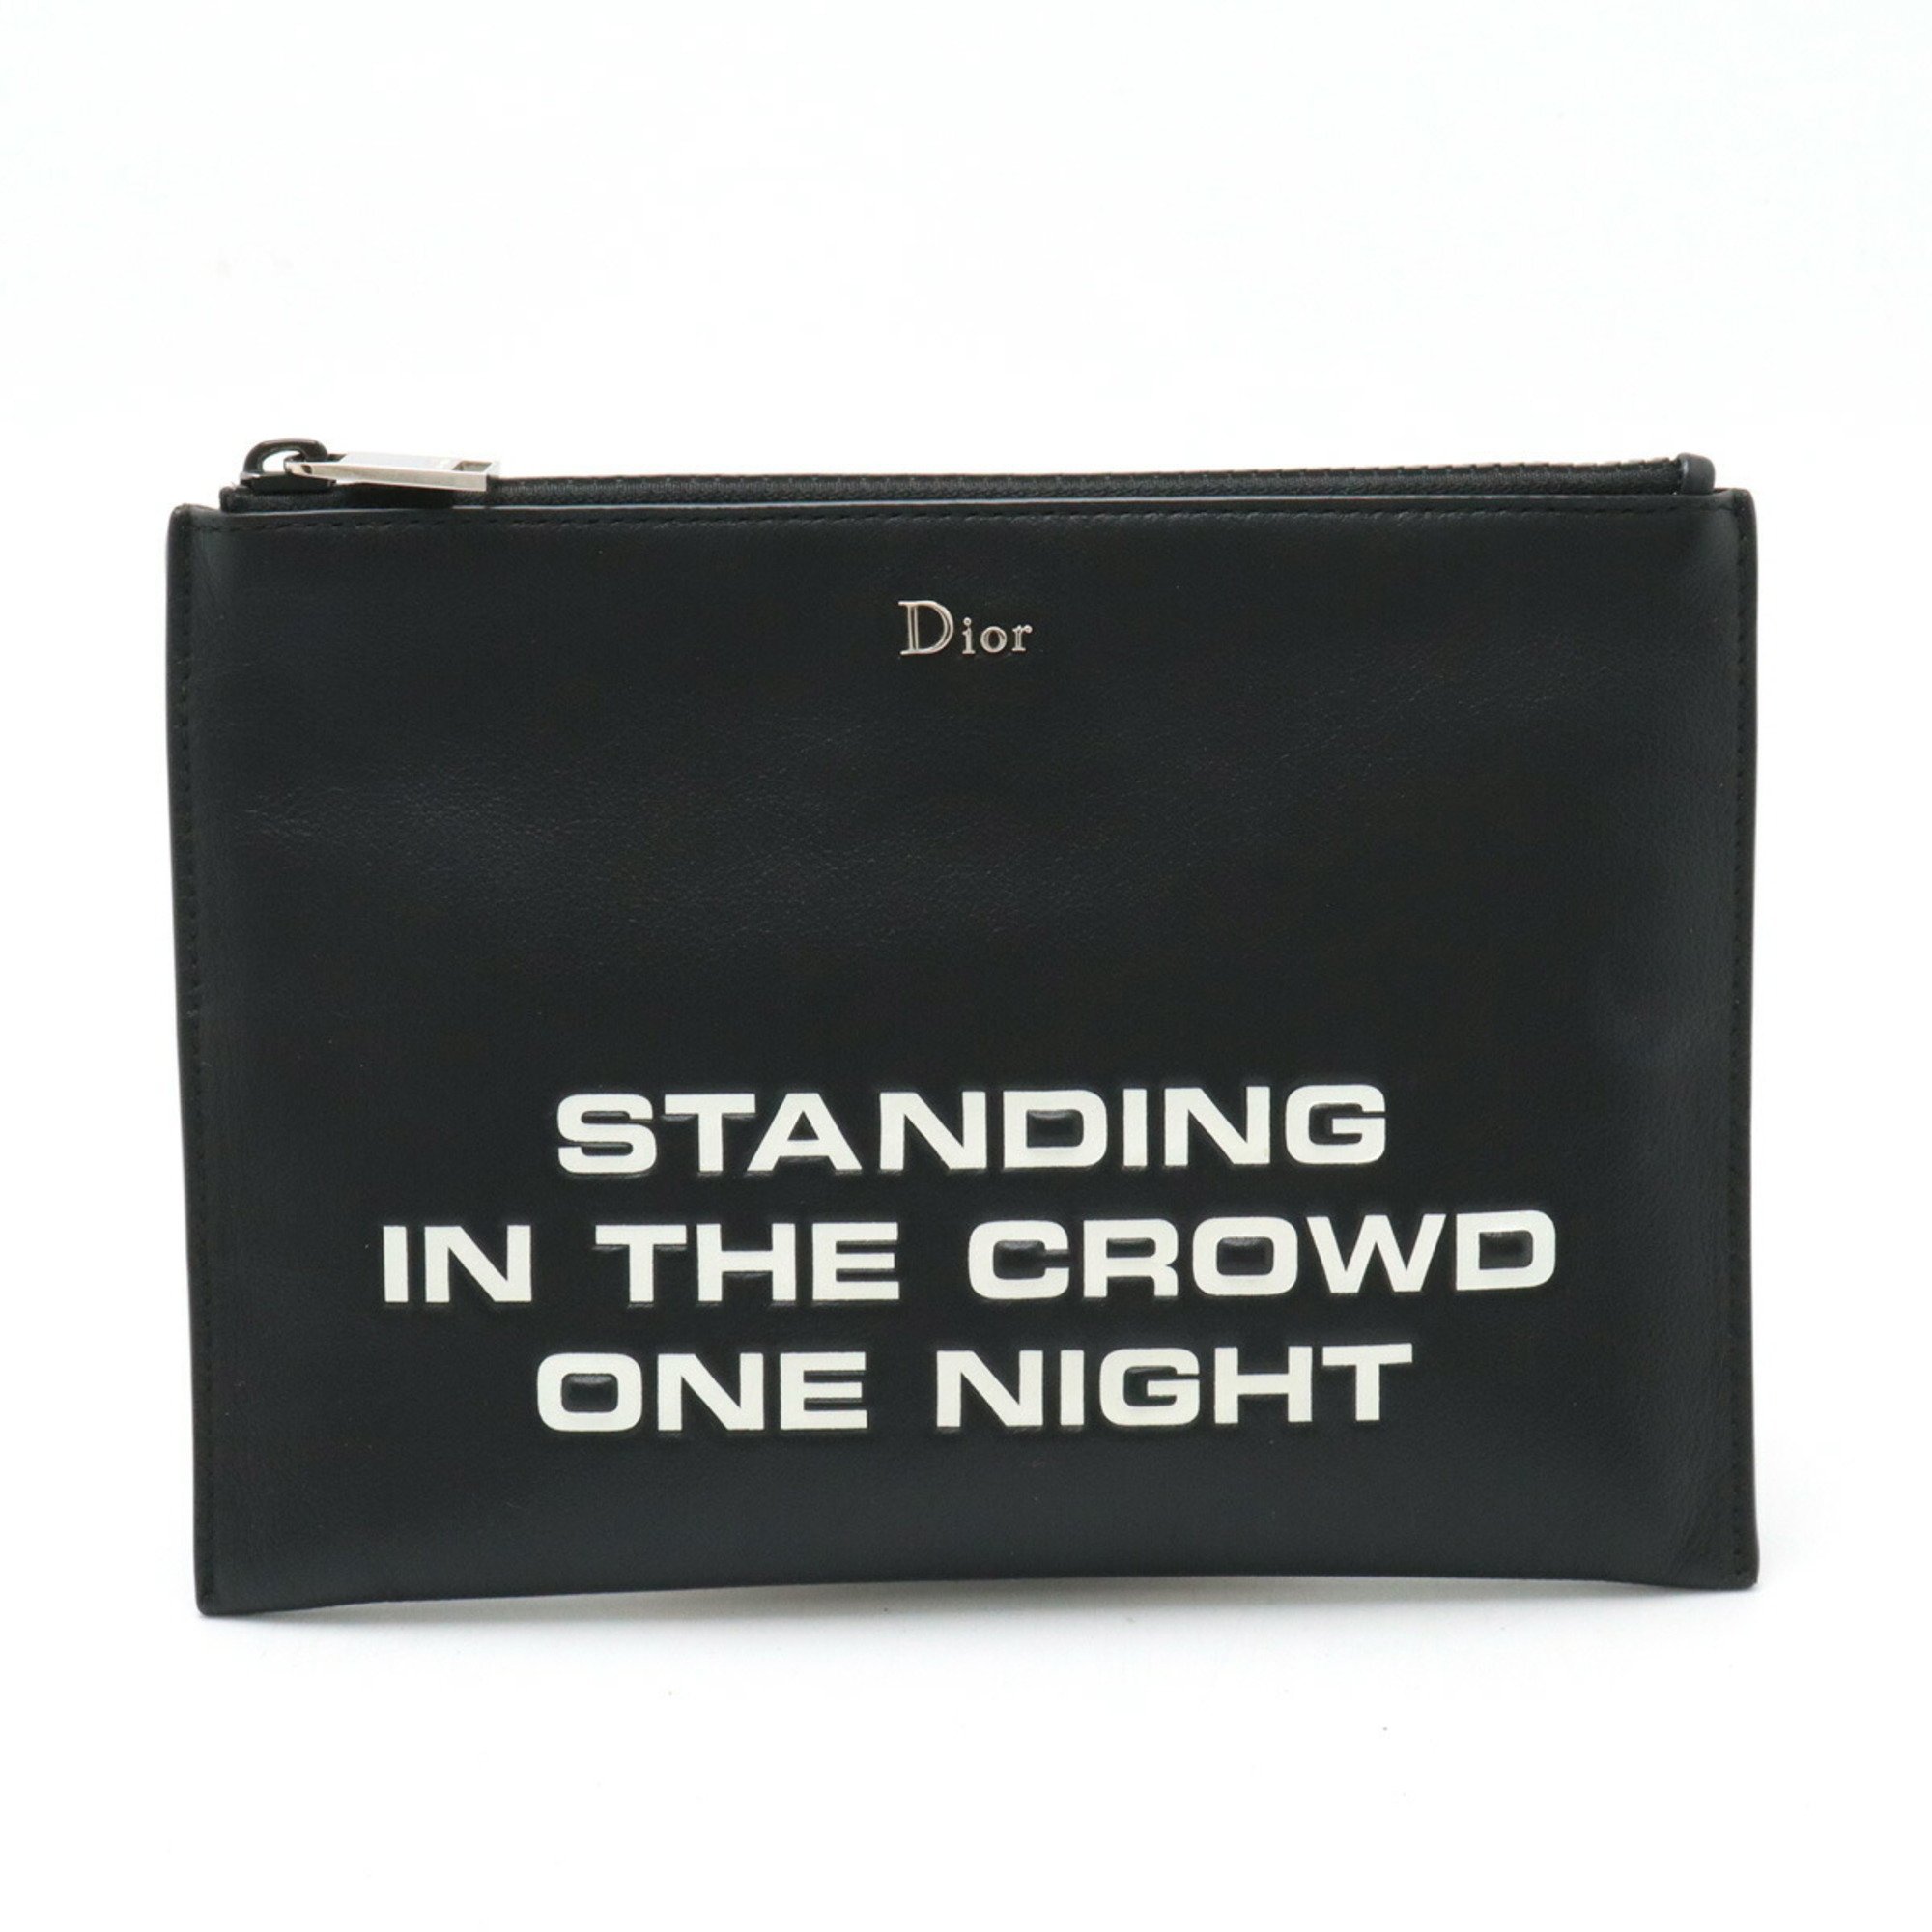 Christian Dior DIOR HOMME Homme Pouch Clutch Bag Second Leather Black